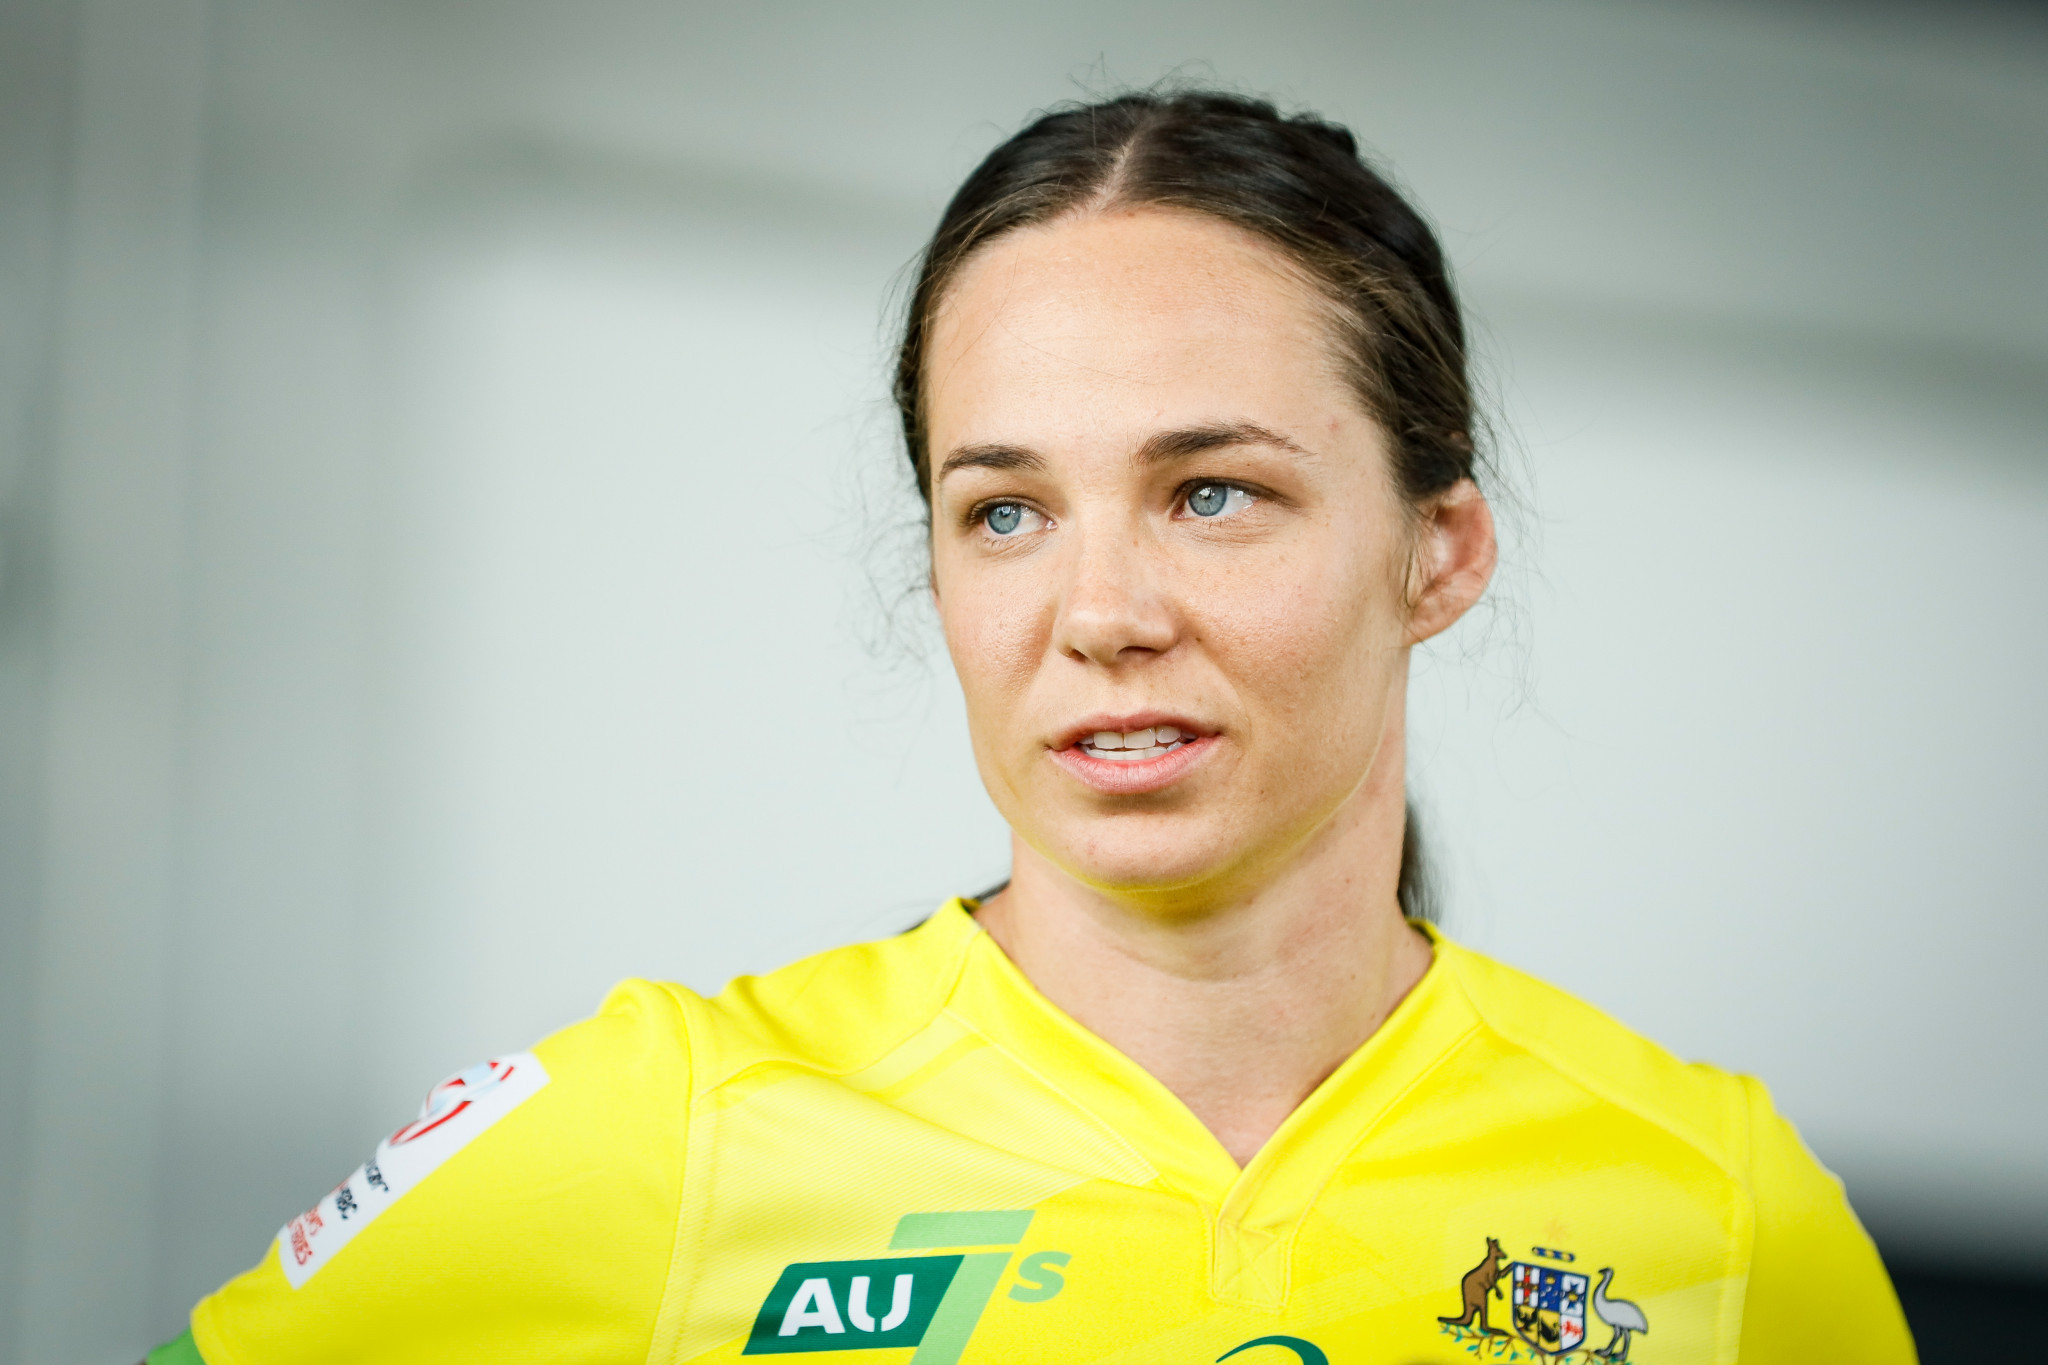 Rugby sevens player Dalton rules out AFLW return to prepare for Tokyo 2020